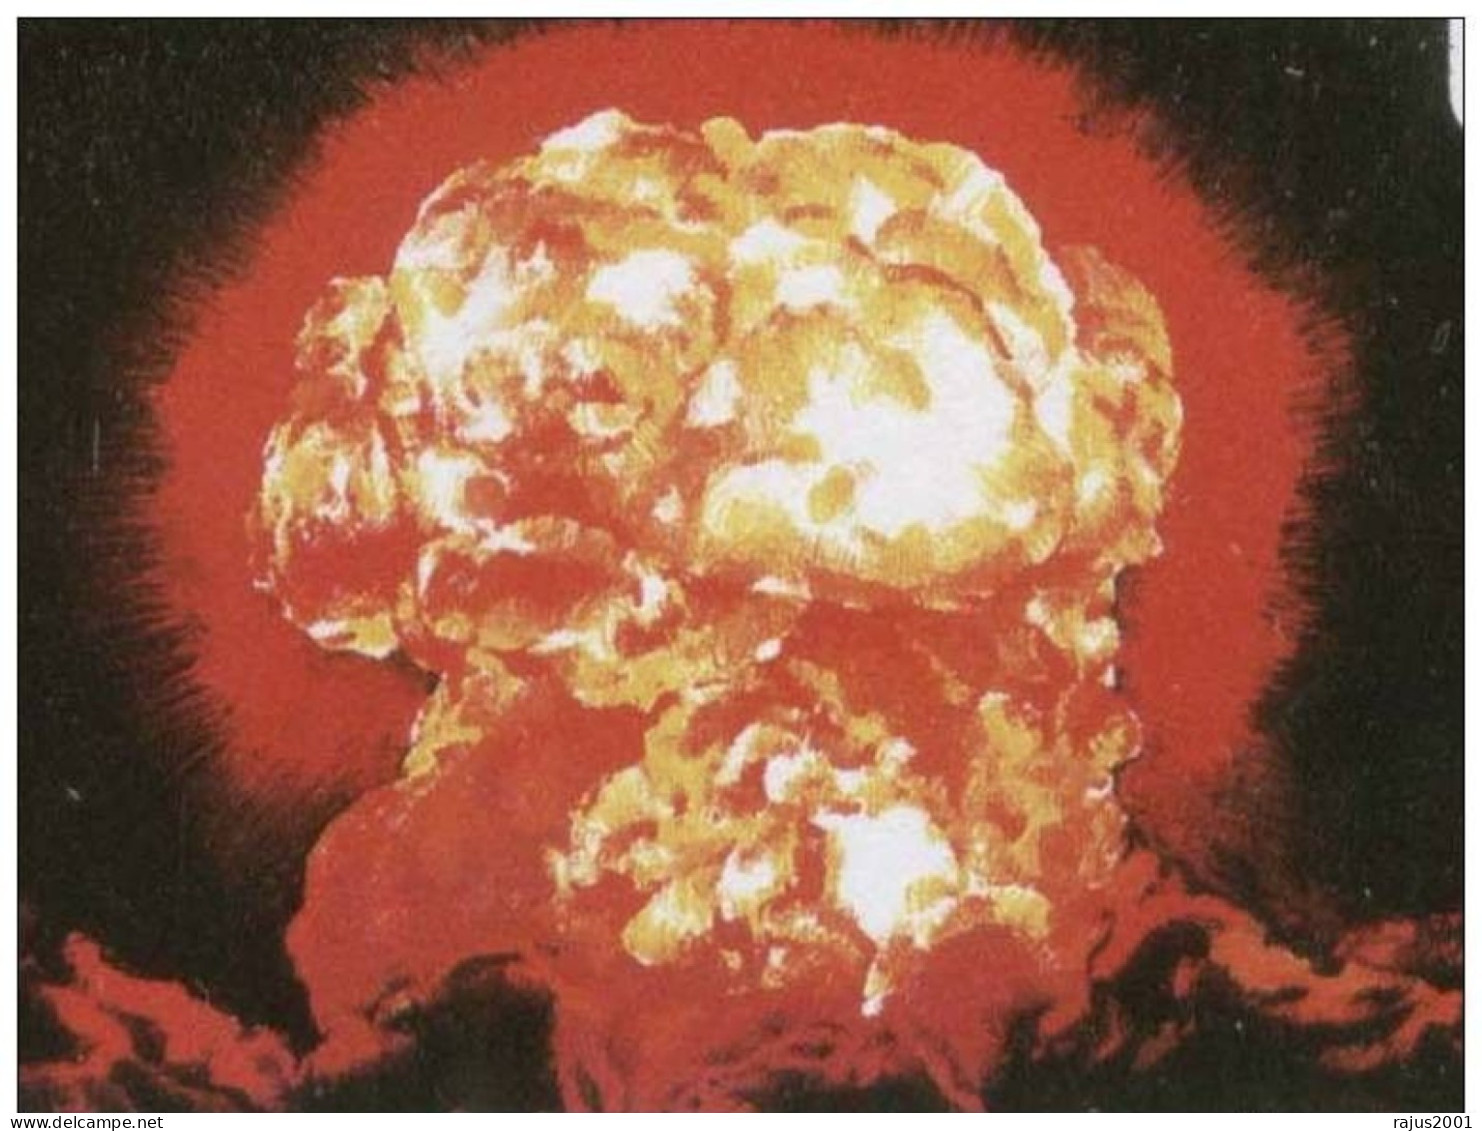 USA & Russia Engage In Arms Race, US Explode First Hydrogen Bomb At Enewetak Atoll, Atomic Bomb, Marshall Island FDC - Atome